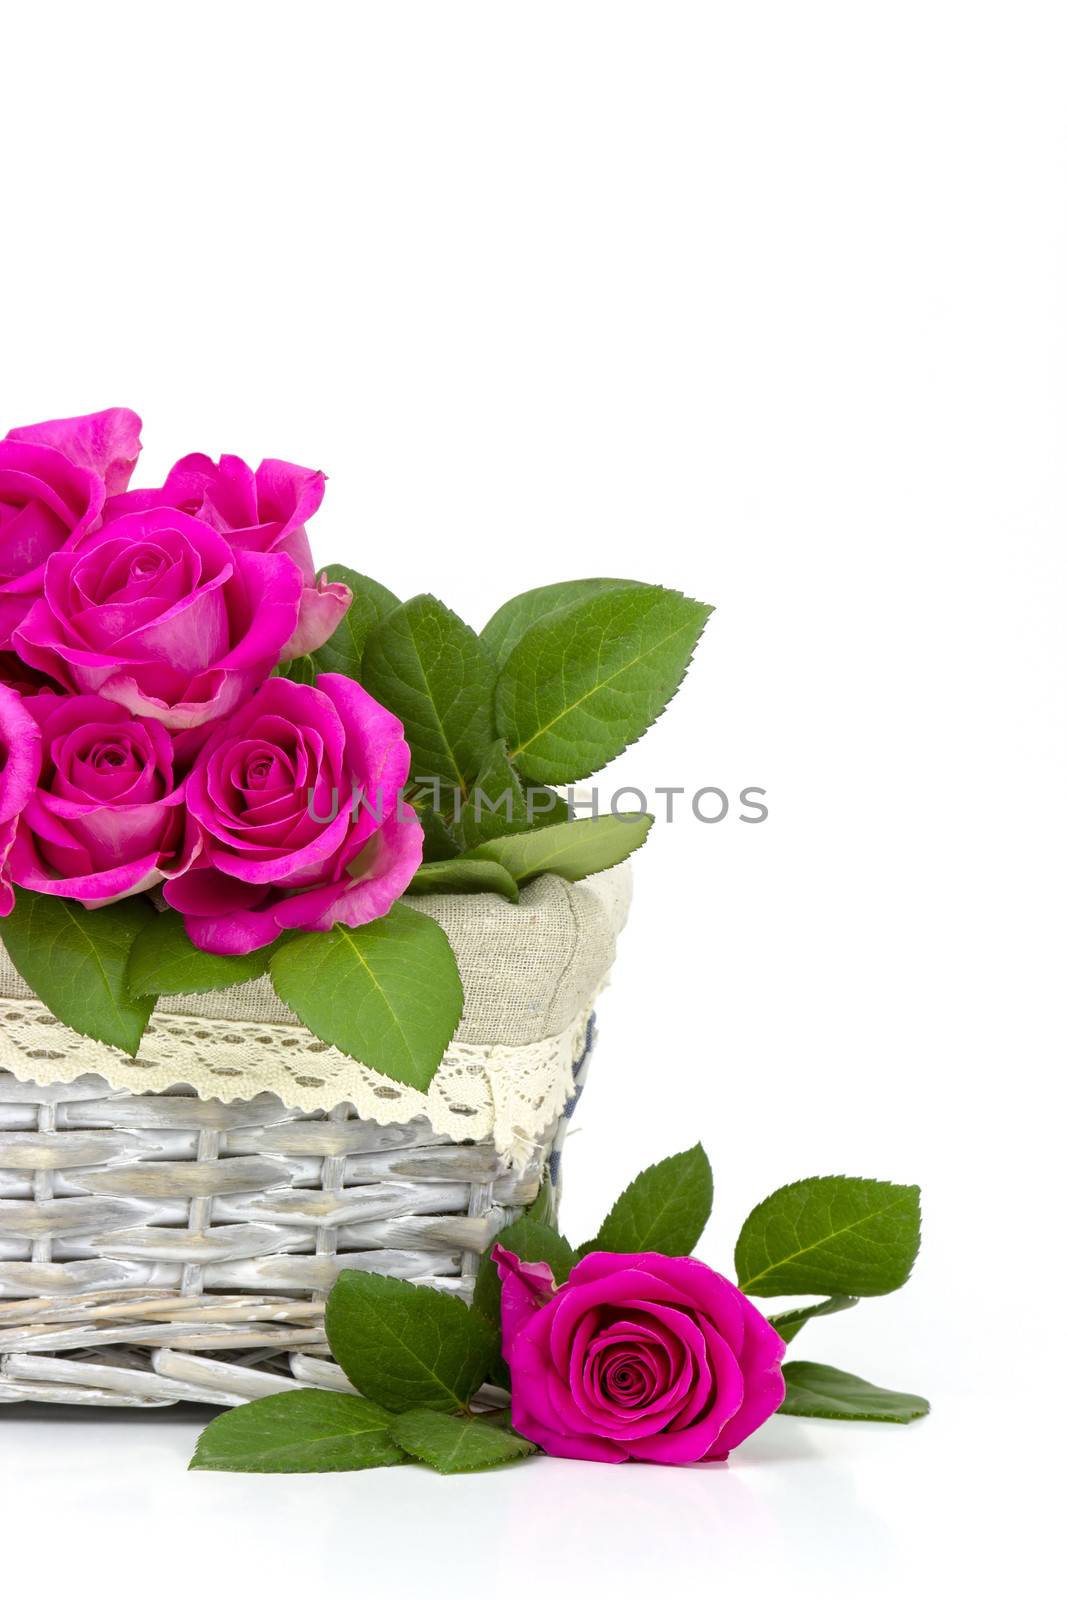 pink roses in a basket by miradrozdowski